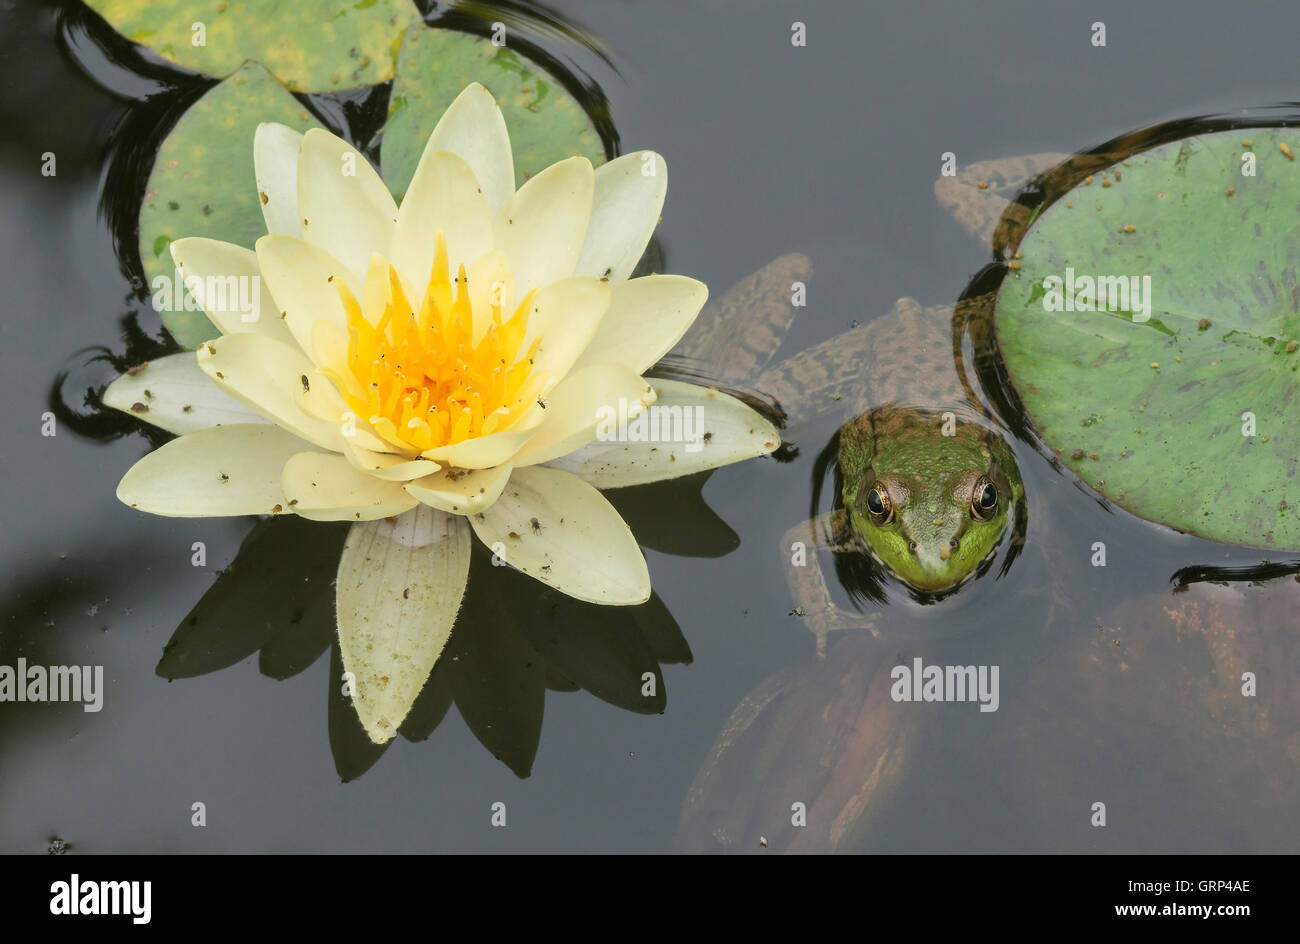 Green Frog Rana clamitans in pond with Water Lilys (Nymphaea odorata), and Springtails (Collembola) Eastern USA Stock Photo